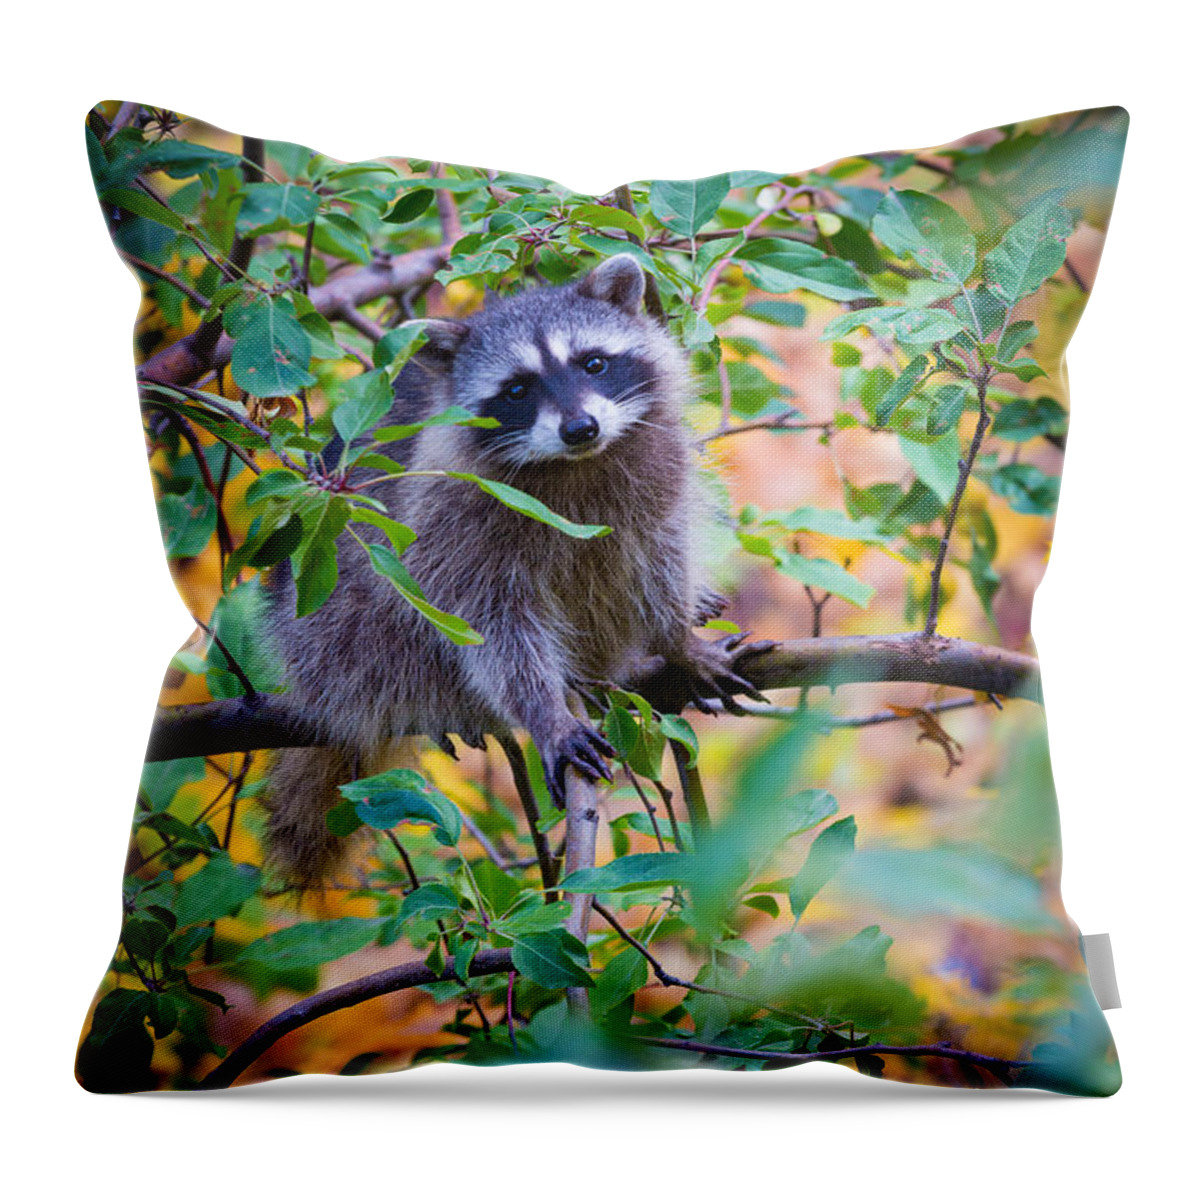 America Throw Pillow featuring the photograph Raccoon by Inge Johnsson